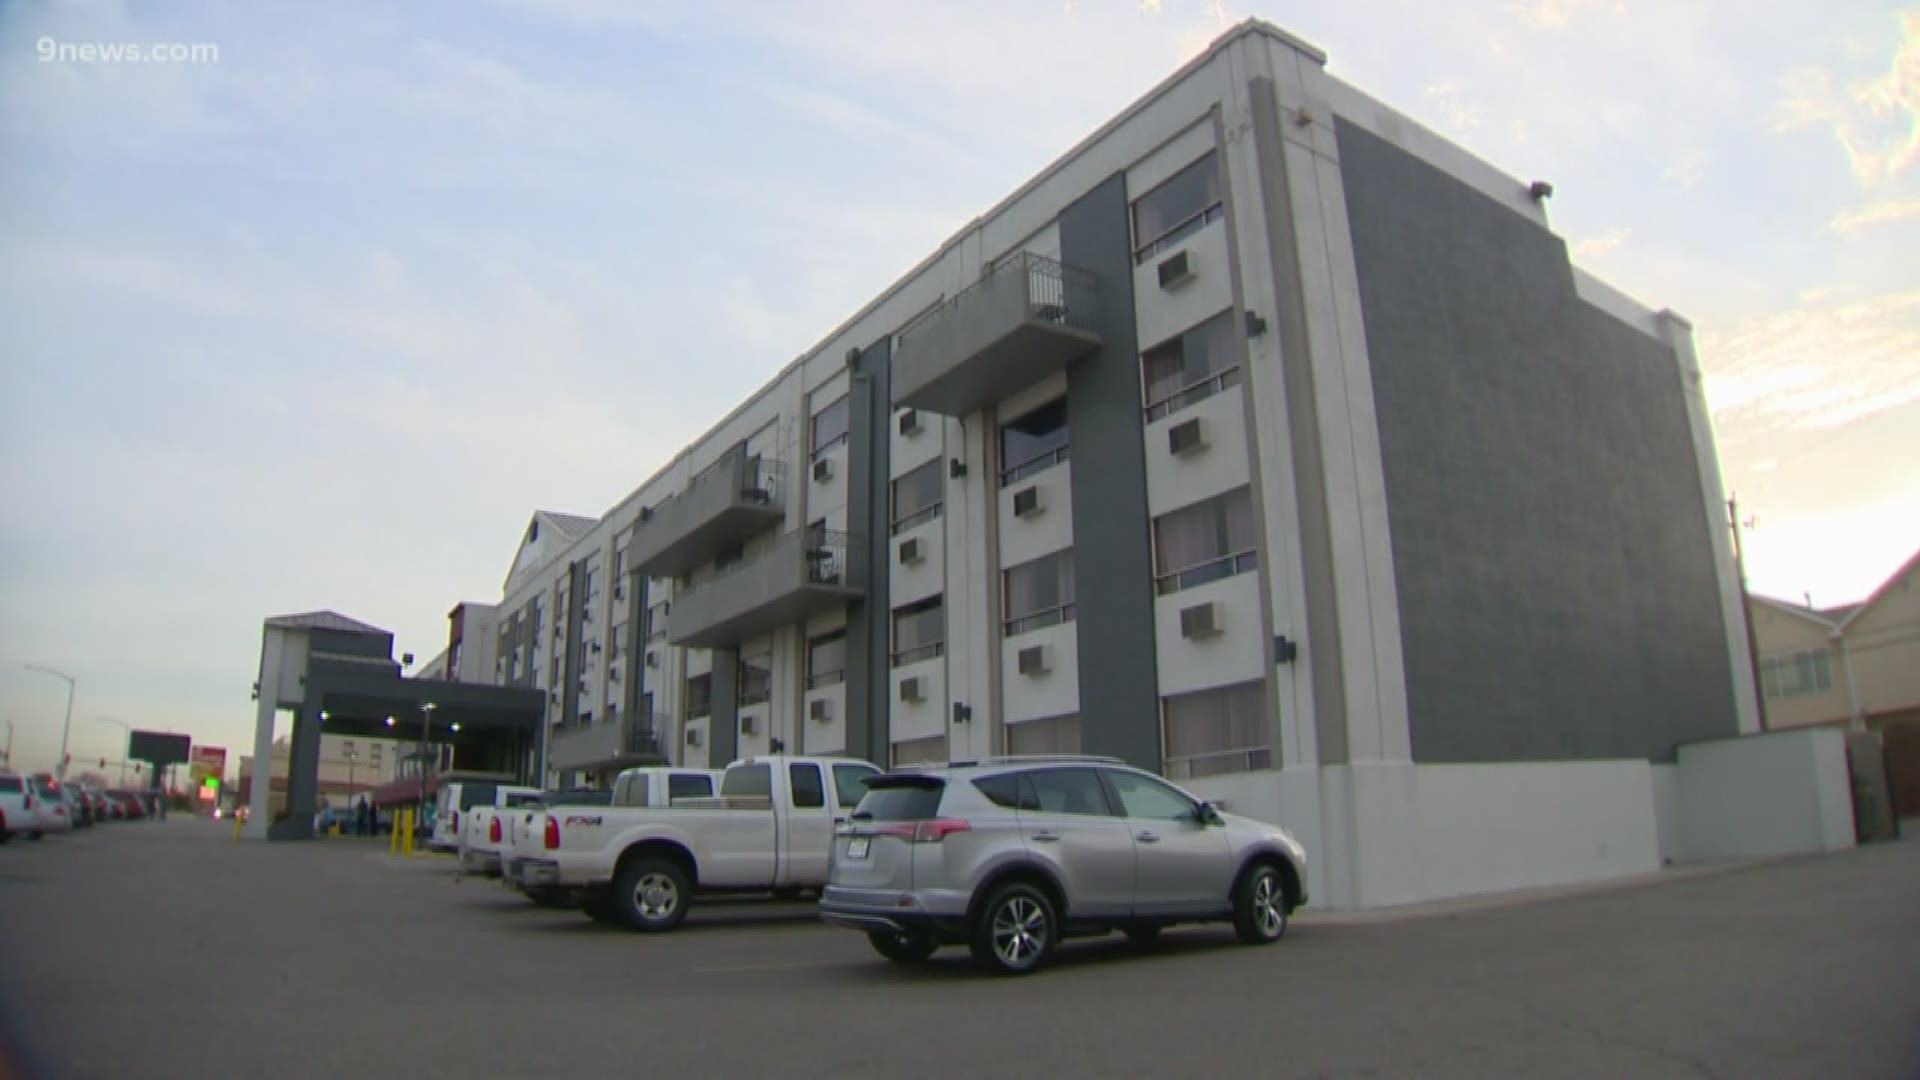 The Colorado Coalition for the Homeless held a grand opening Tuesday afternoon for Fusion Studios, where 139 hotel rooms were converted into studio apartments.